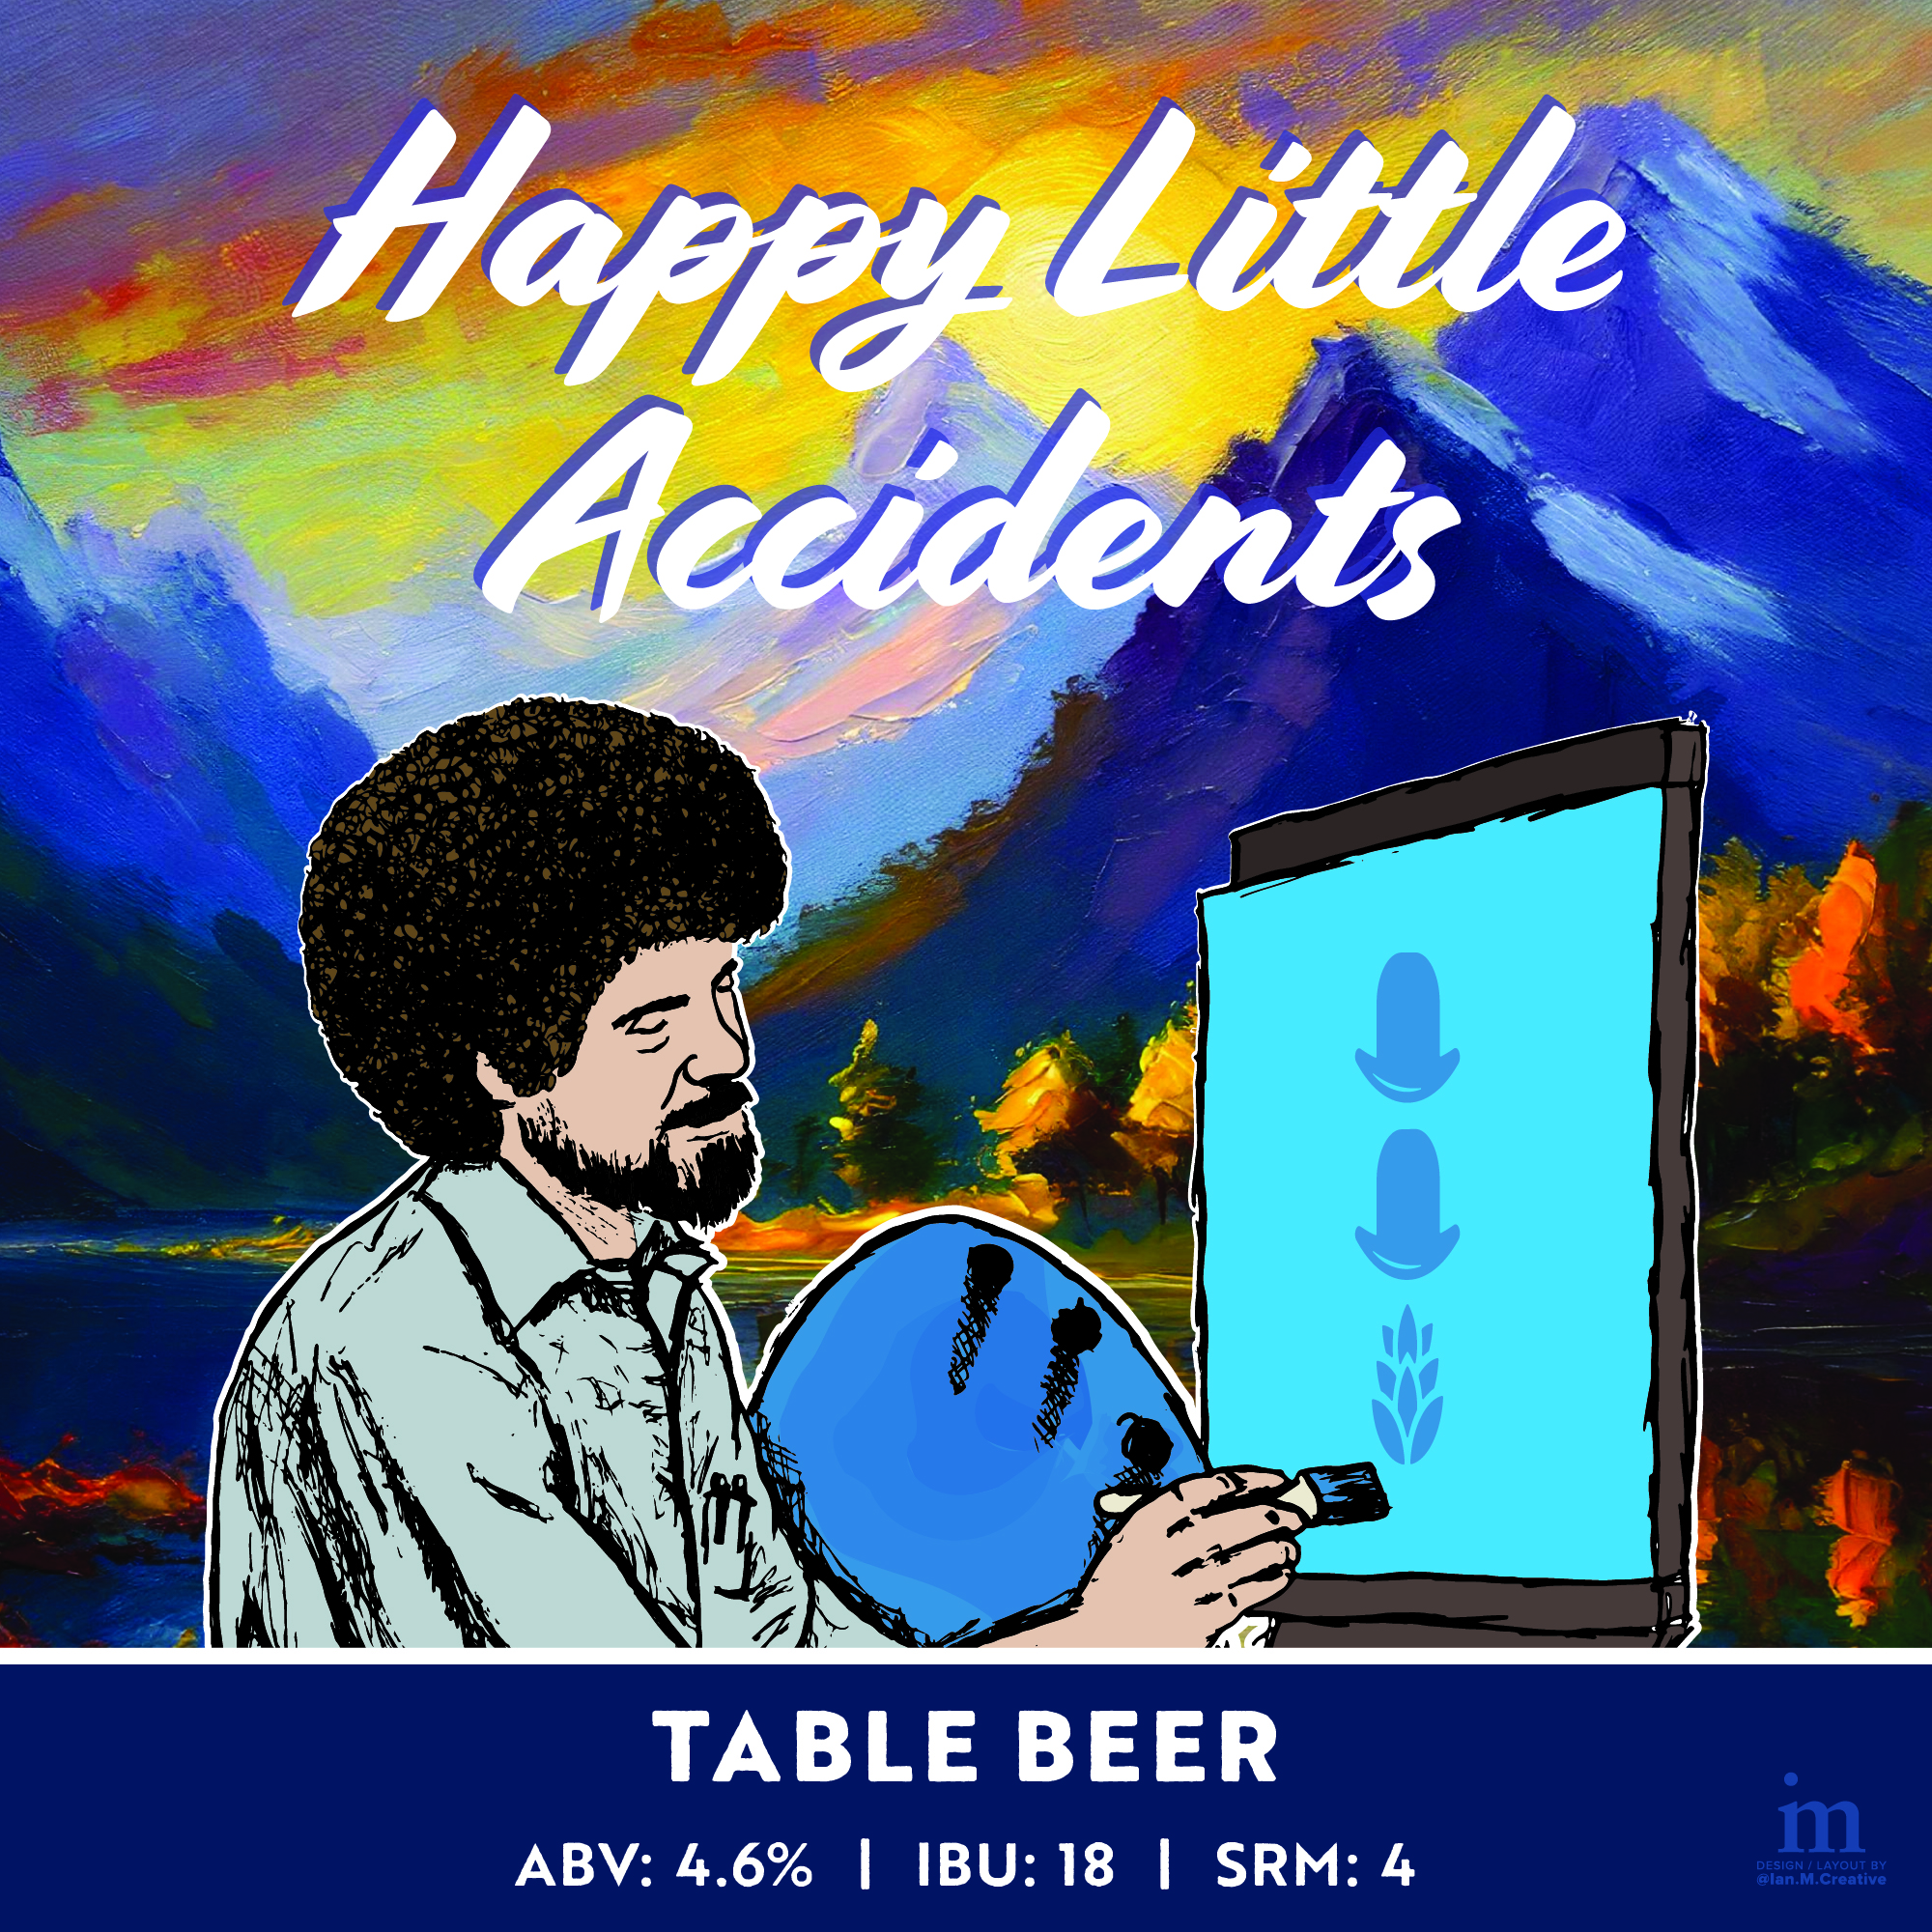 Happy little accidents